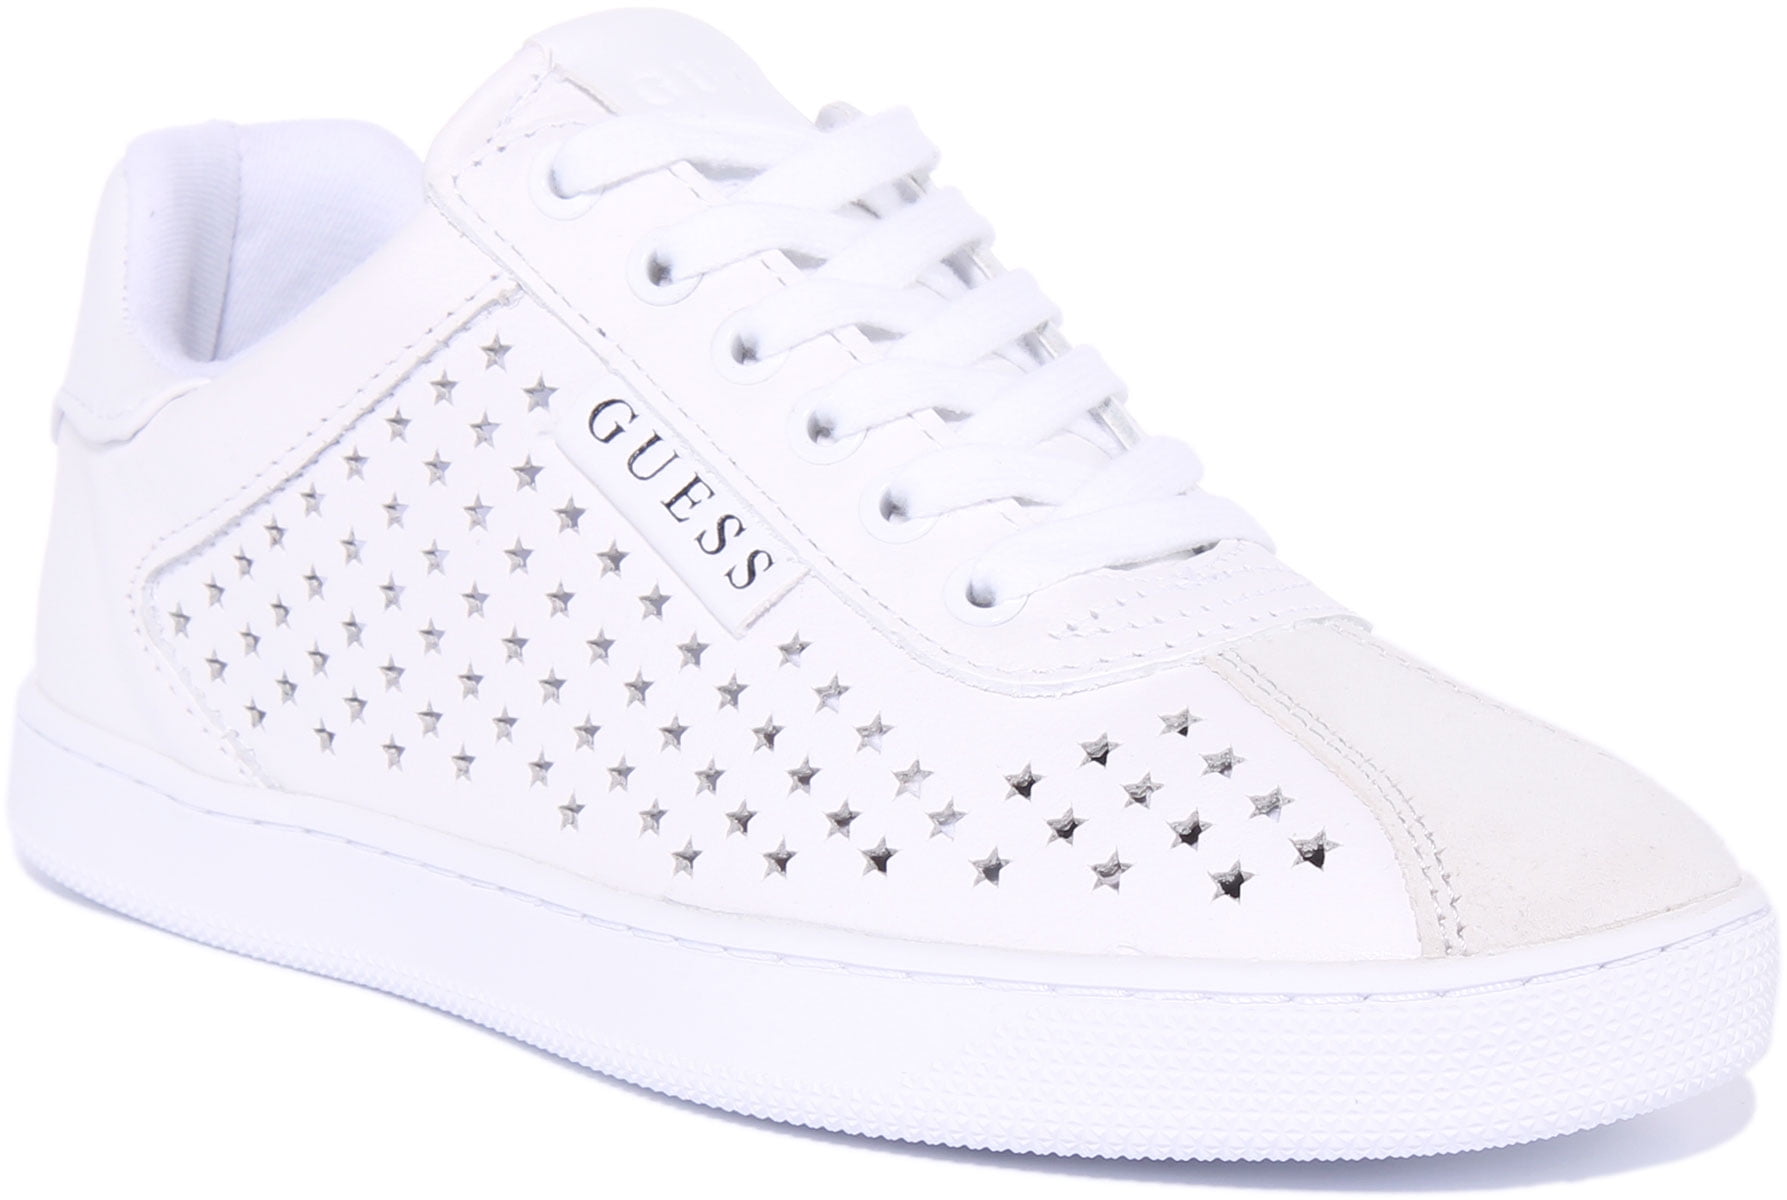 Guess White Leather Sparkly Sneakers Size 8 - $30 - From Diana